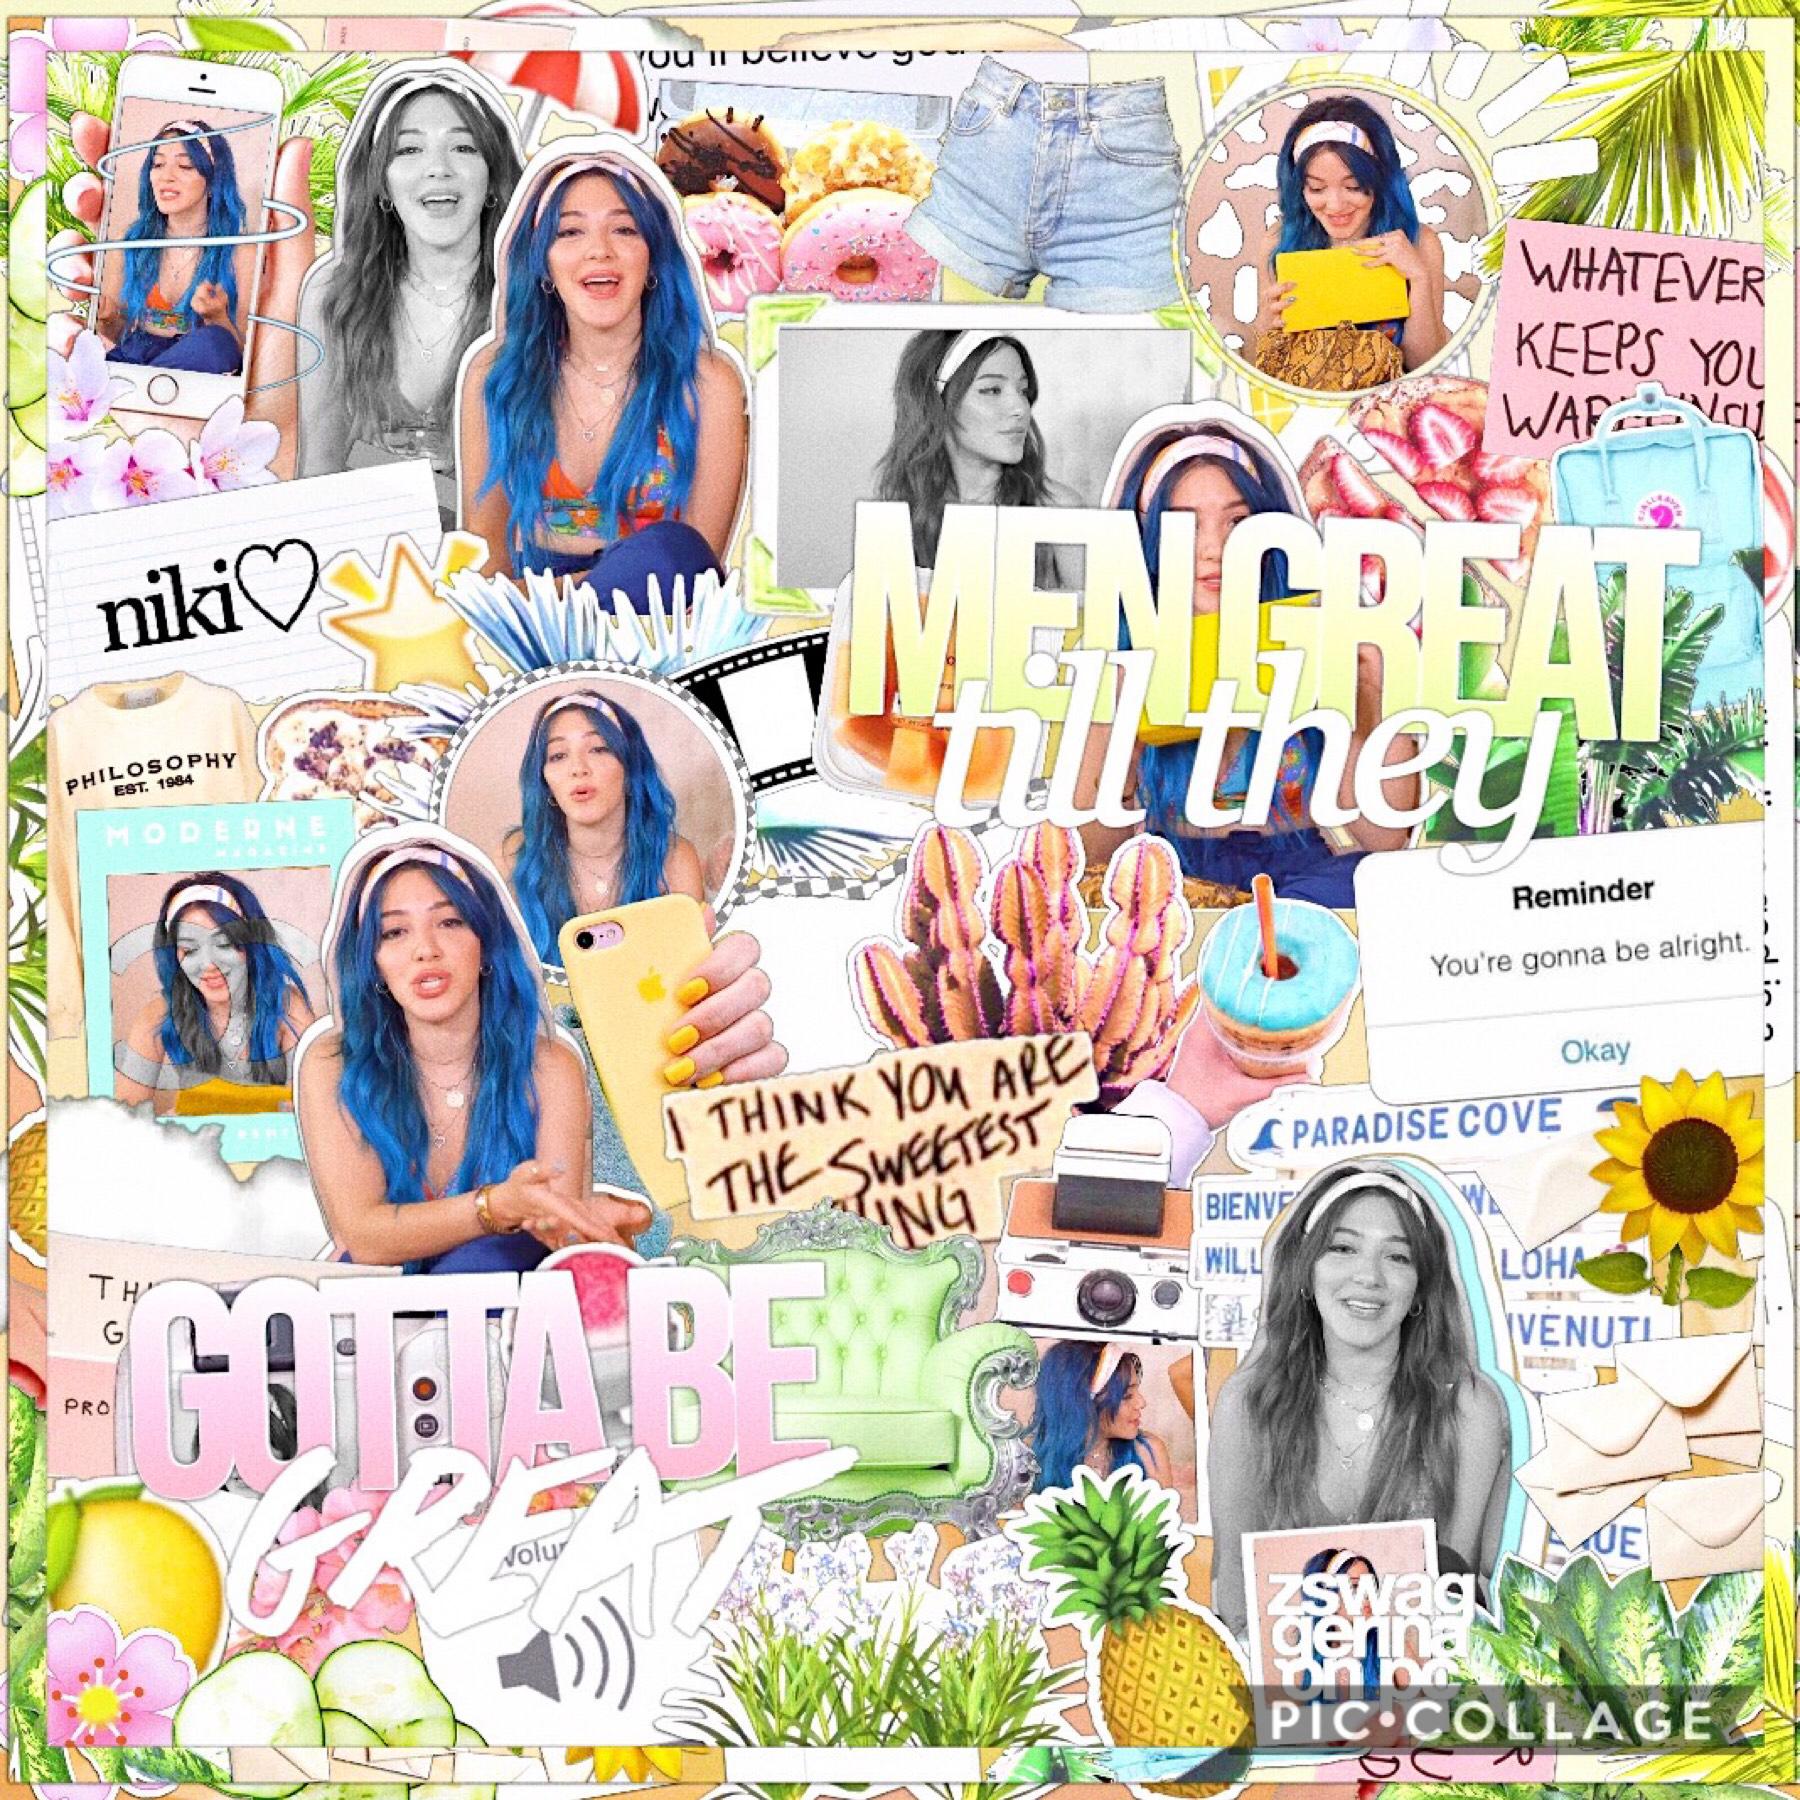 I feel like I always edit niki lol 🦋💛 also if you didn’t know I have a spam account @kellithinkshescool ! follow me there for more kelli stuff, not that you should care 😂